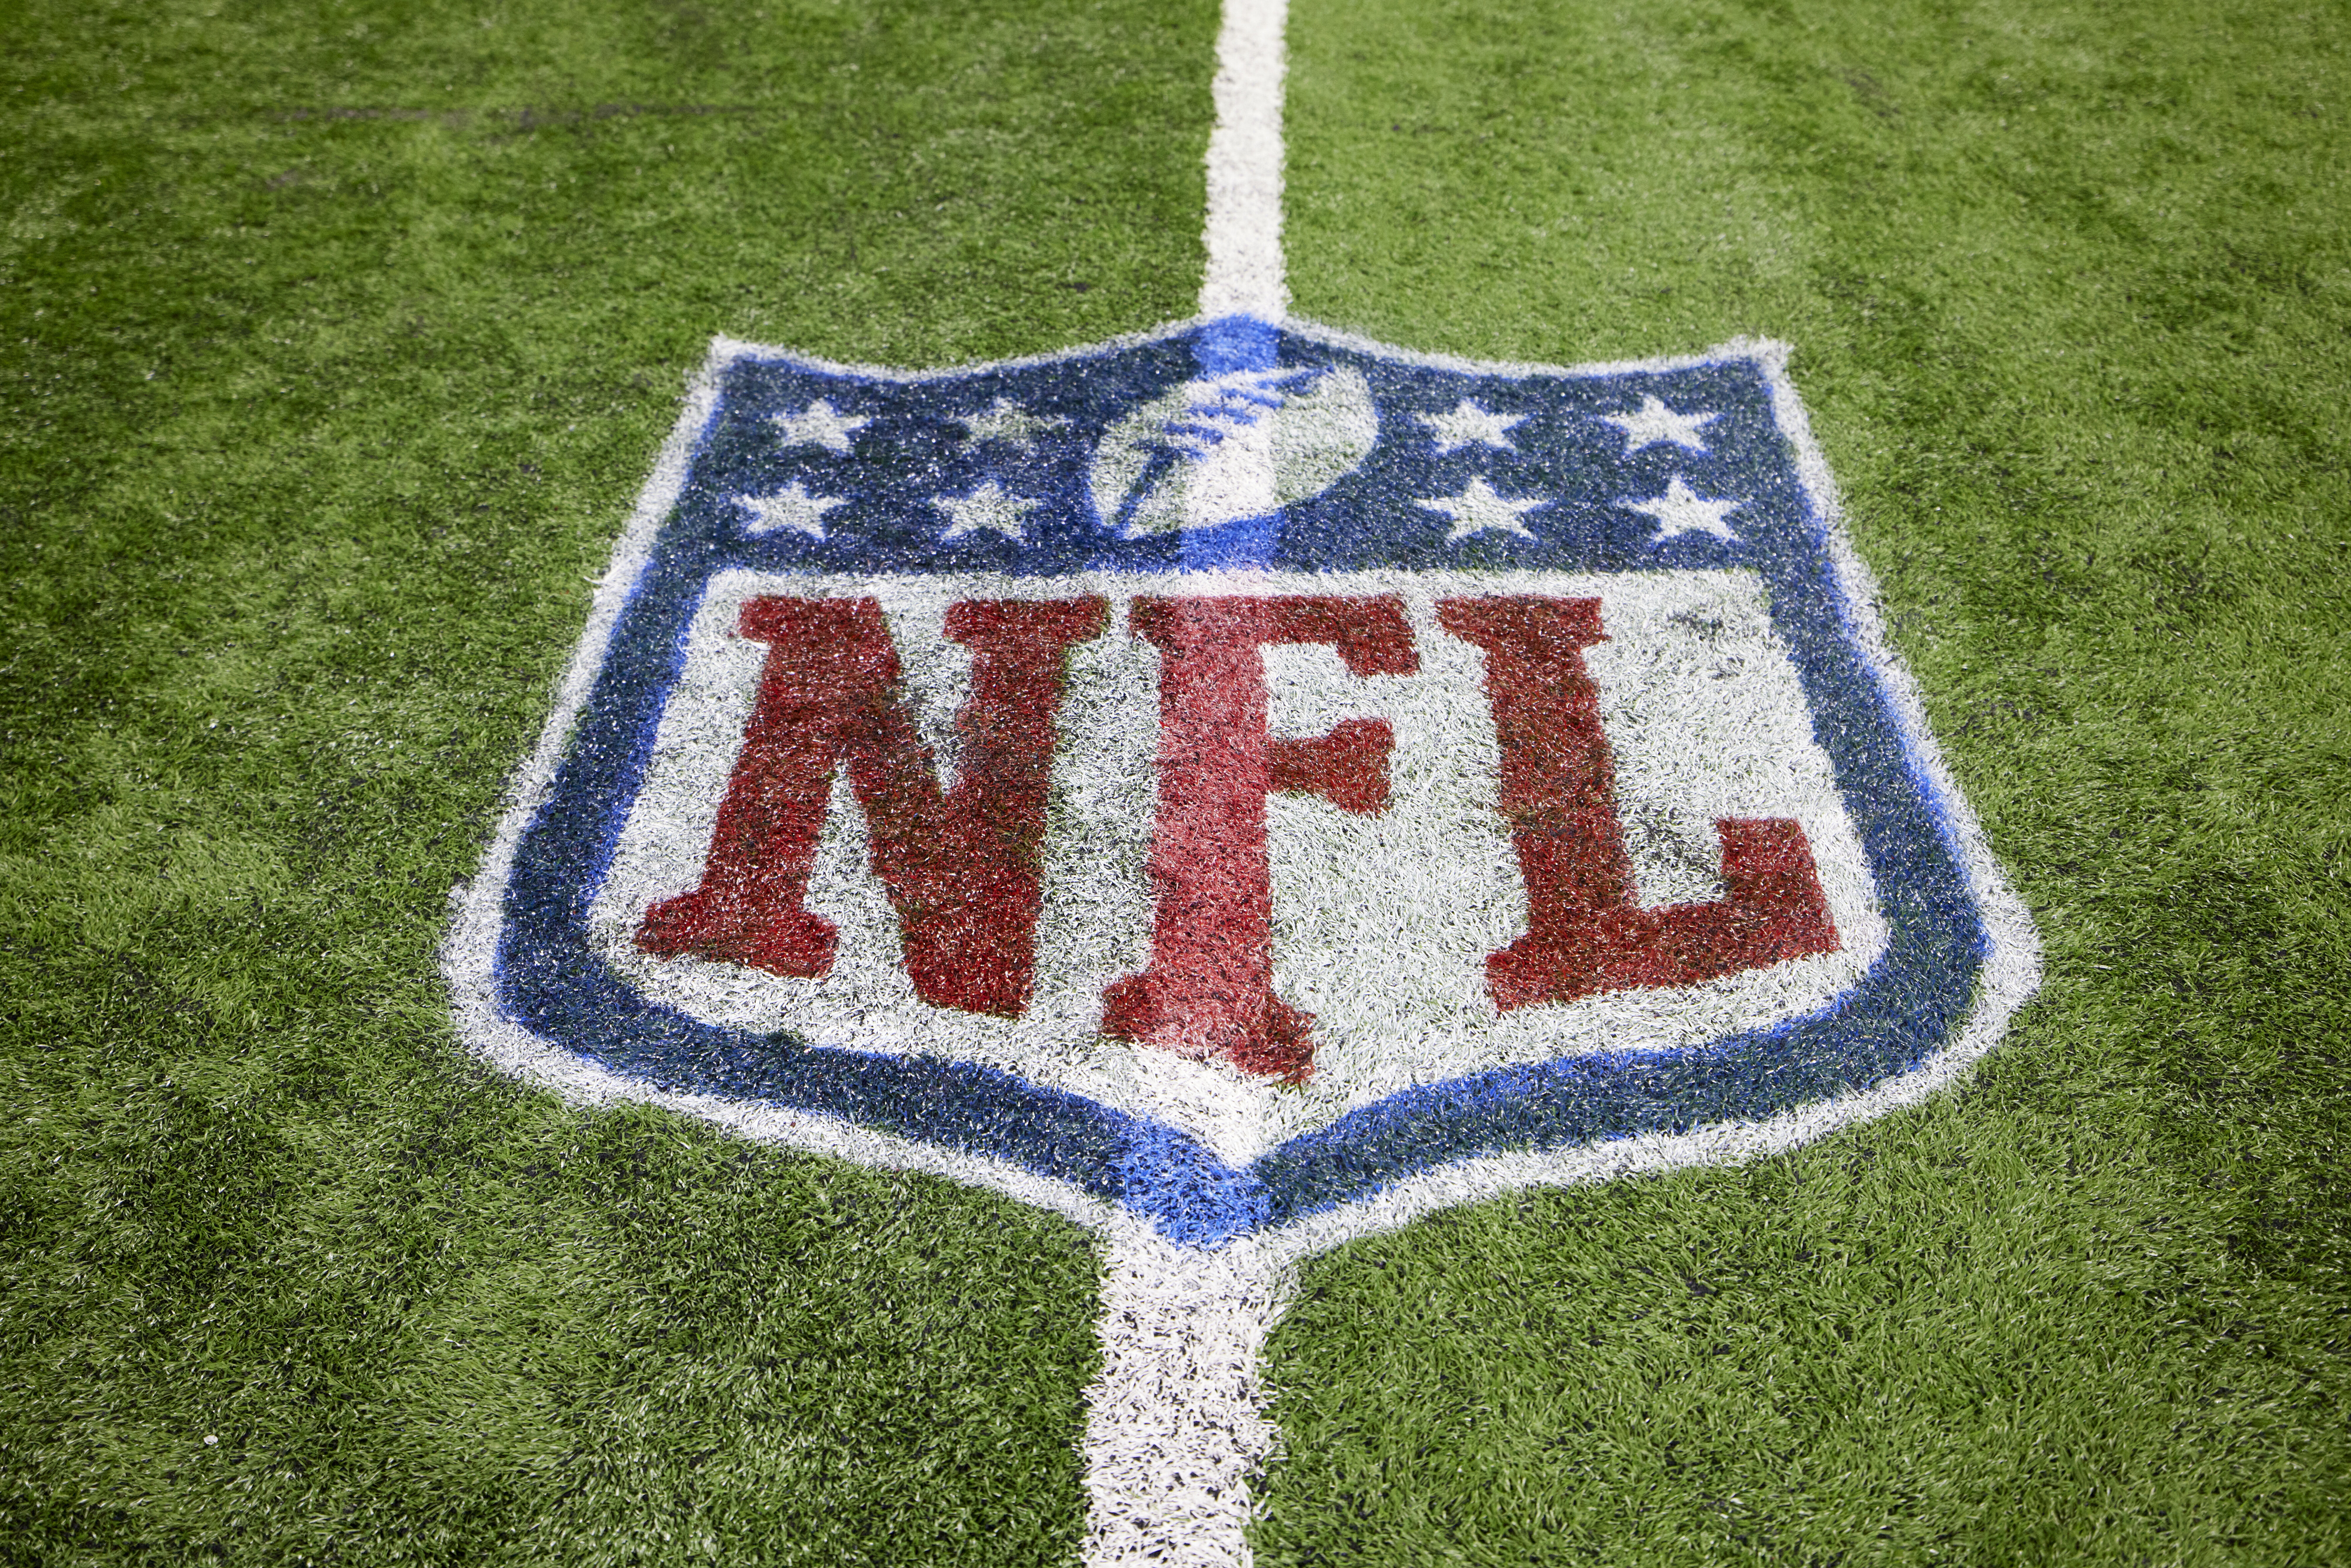 NFL playoff schedule 2022: Seedings, dates and times for wild-card weekend